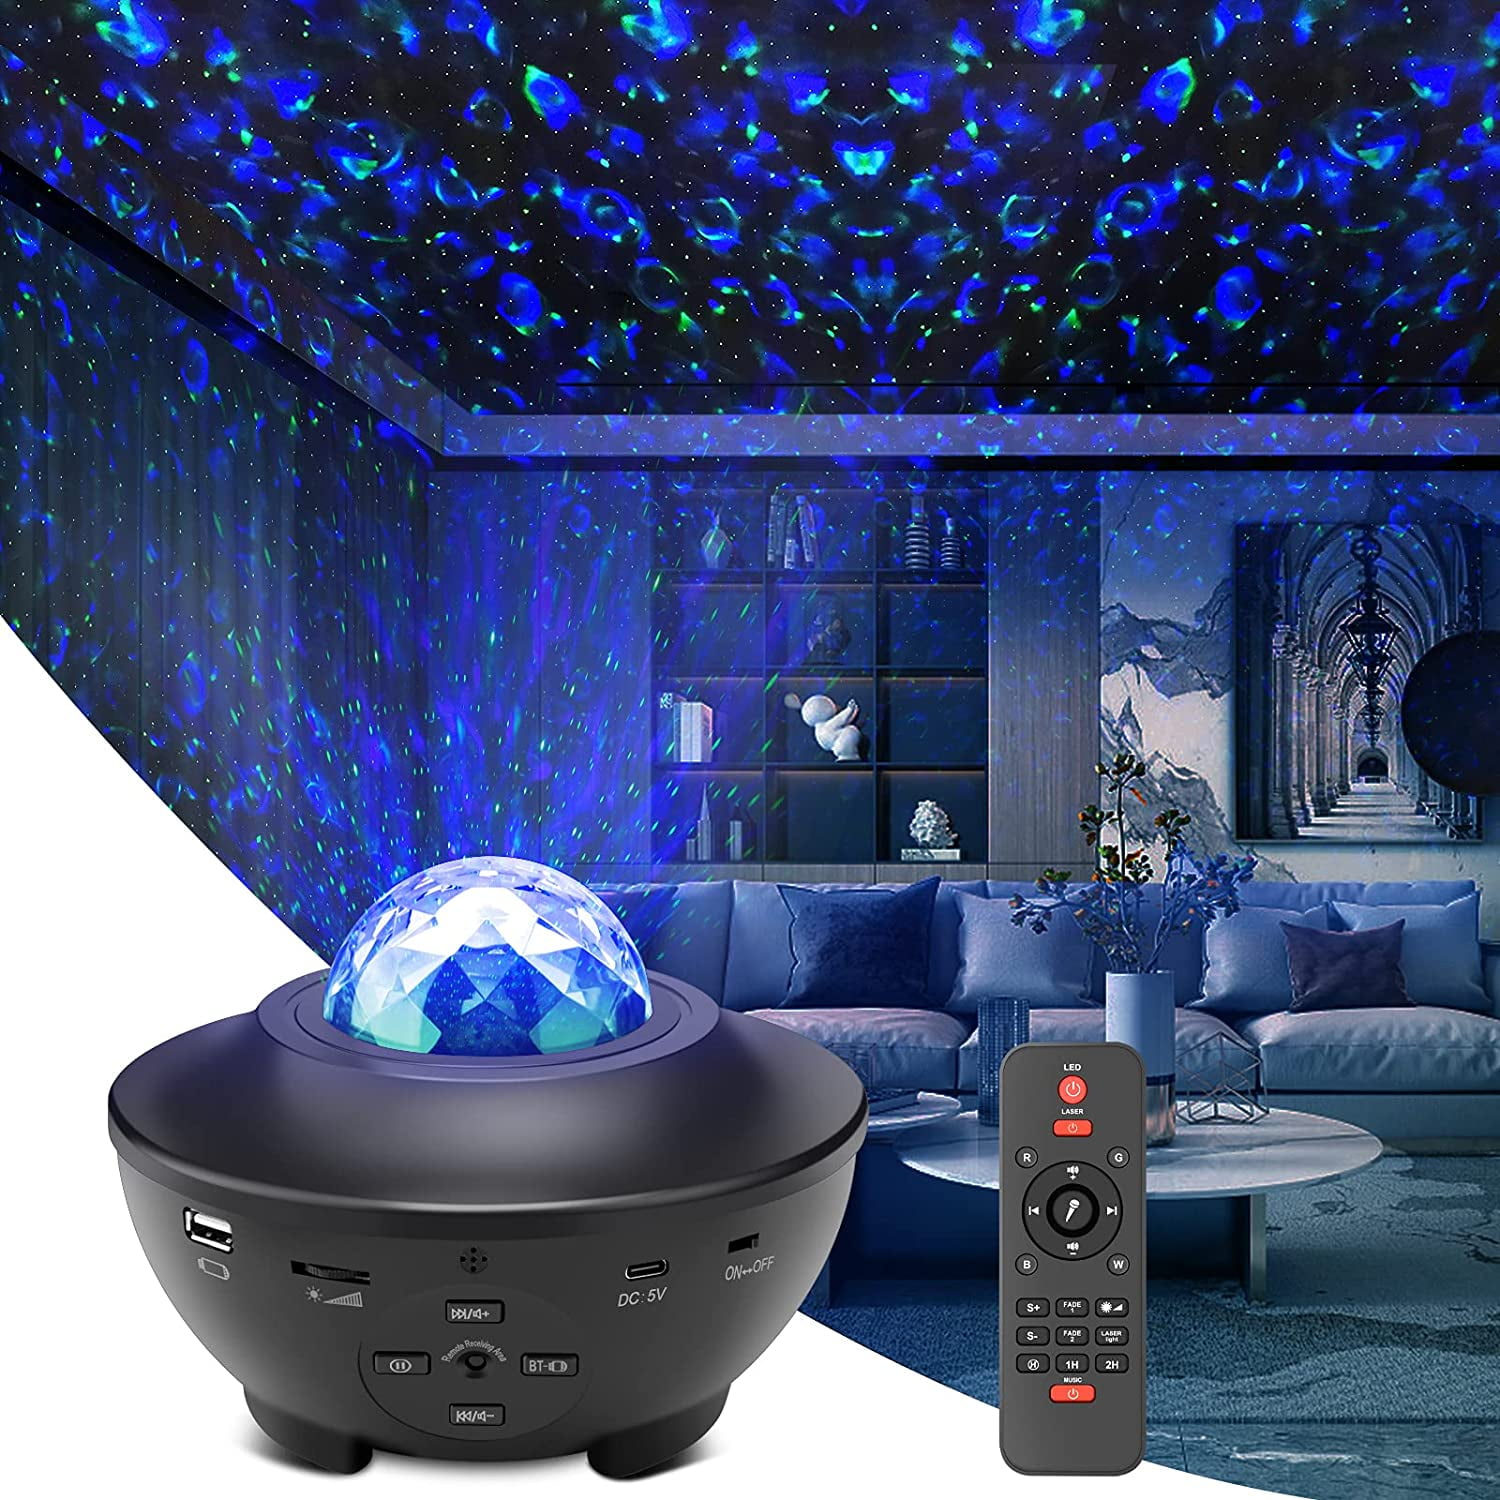 Galaxy Projector with Bluetooth Music Speaker Smart Version 3 in 1 Ocean Wave Projector Timer & Smart App Remote and Voice Control Star Sky Night Light for Kids Bedroom/Game Rooms/Home Theatre/Room Decor/Night Light Ambiance Star Projector